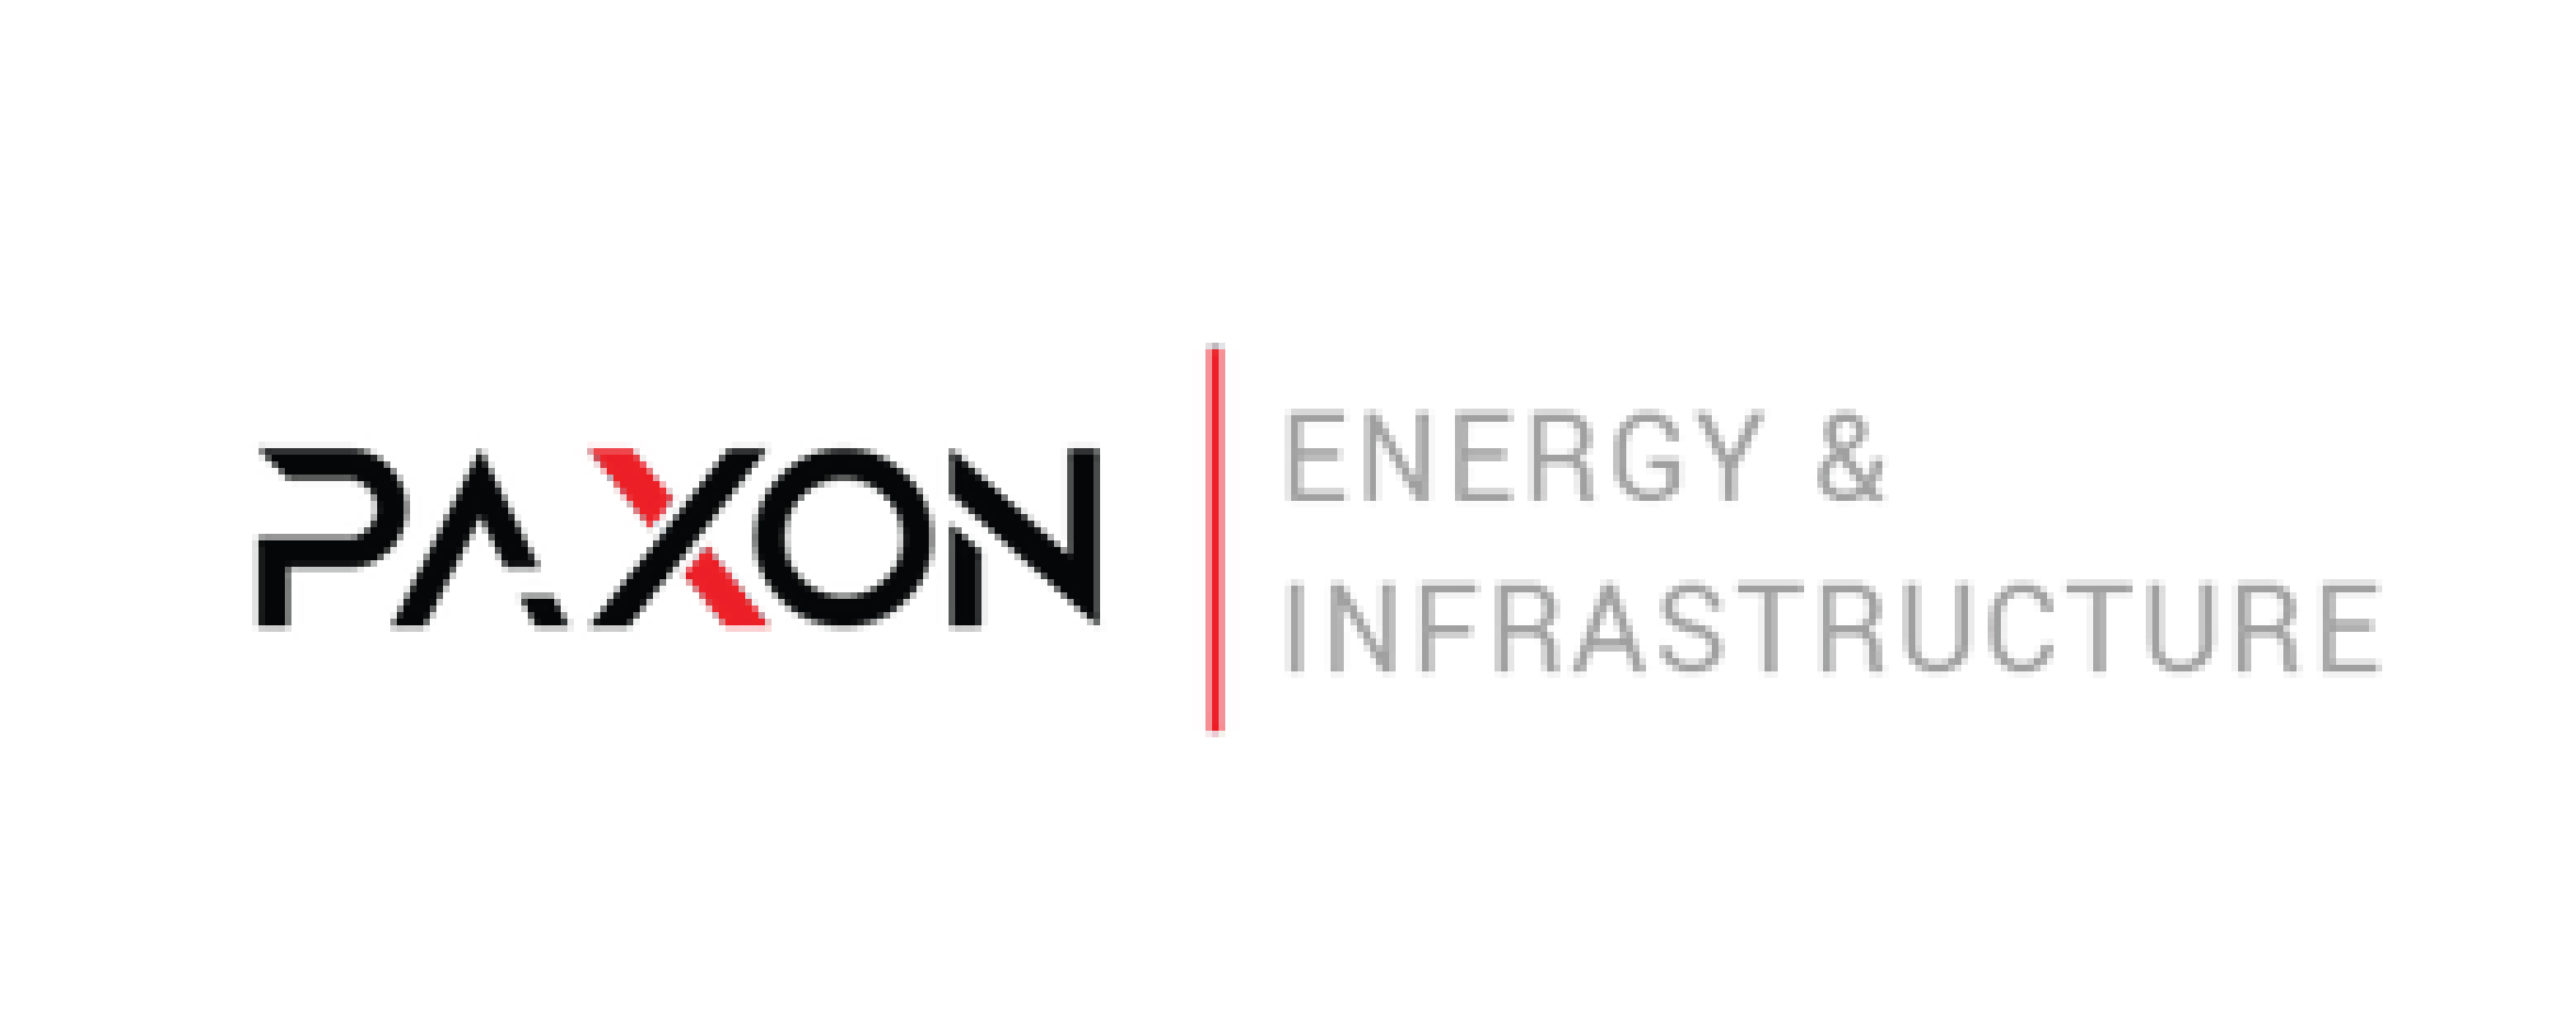 PAXON Energy & Infrastructure